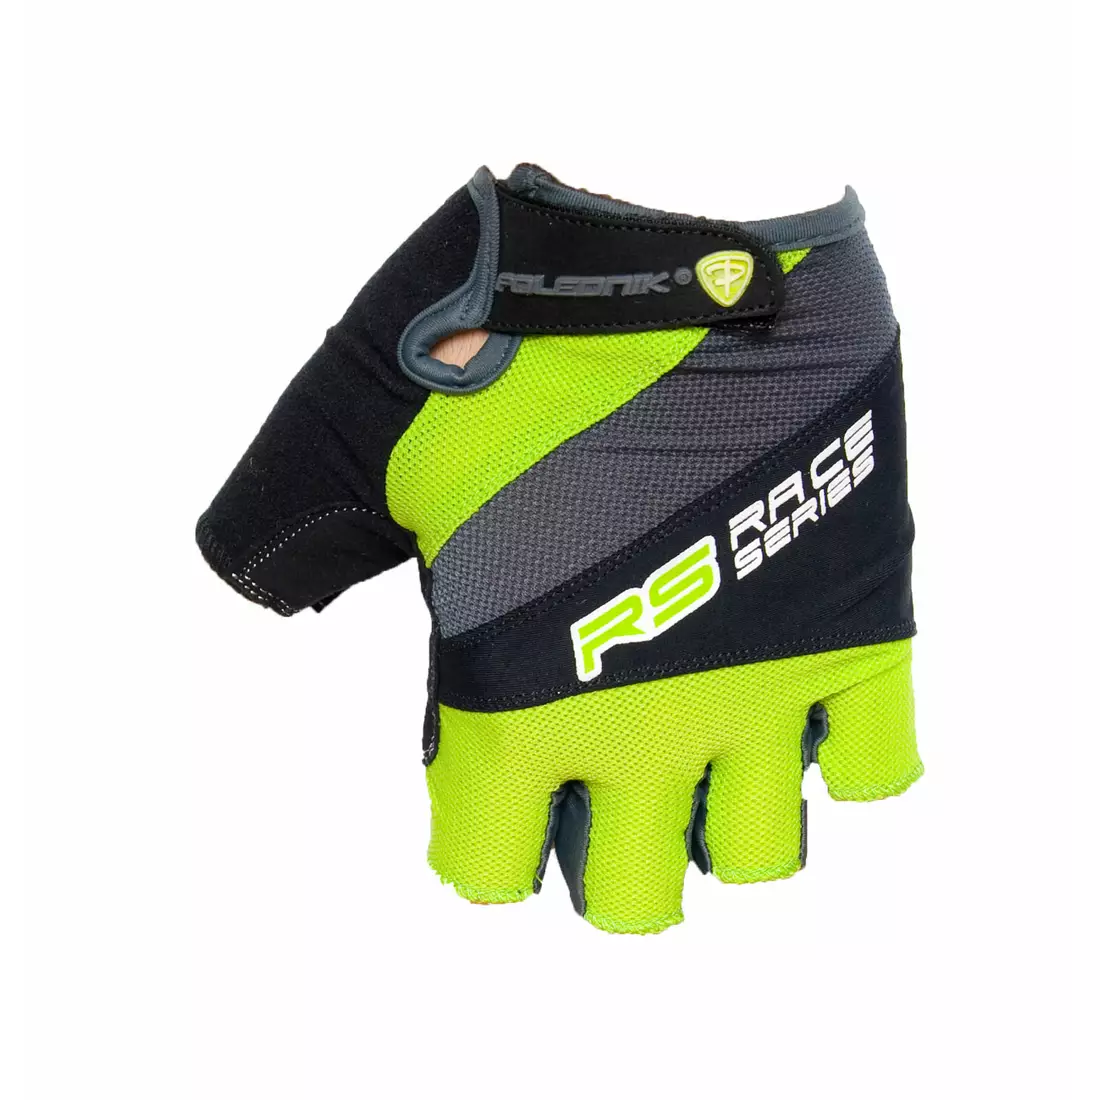 POLEDNIK RS cycling gloves black and green